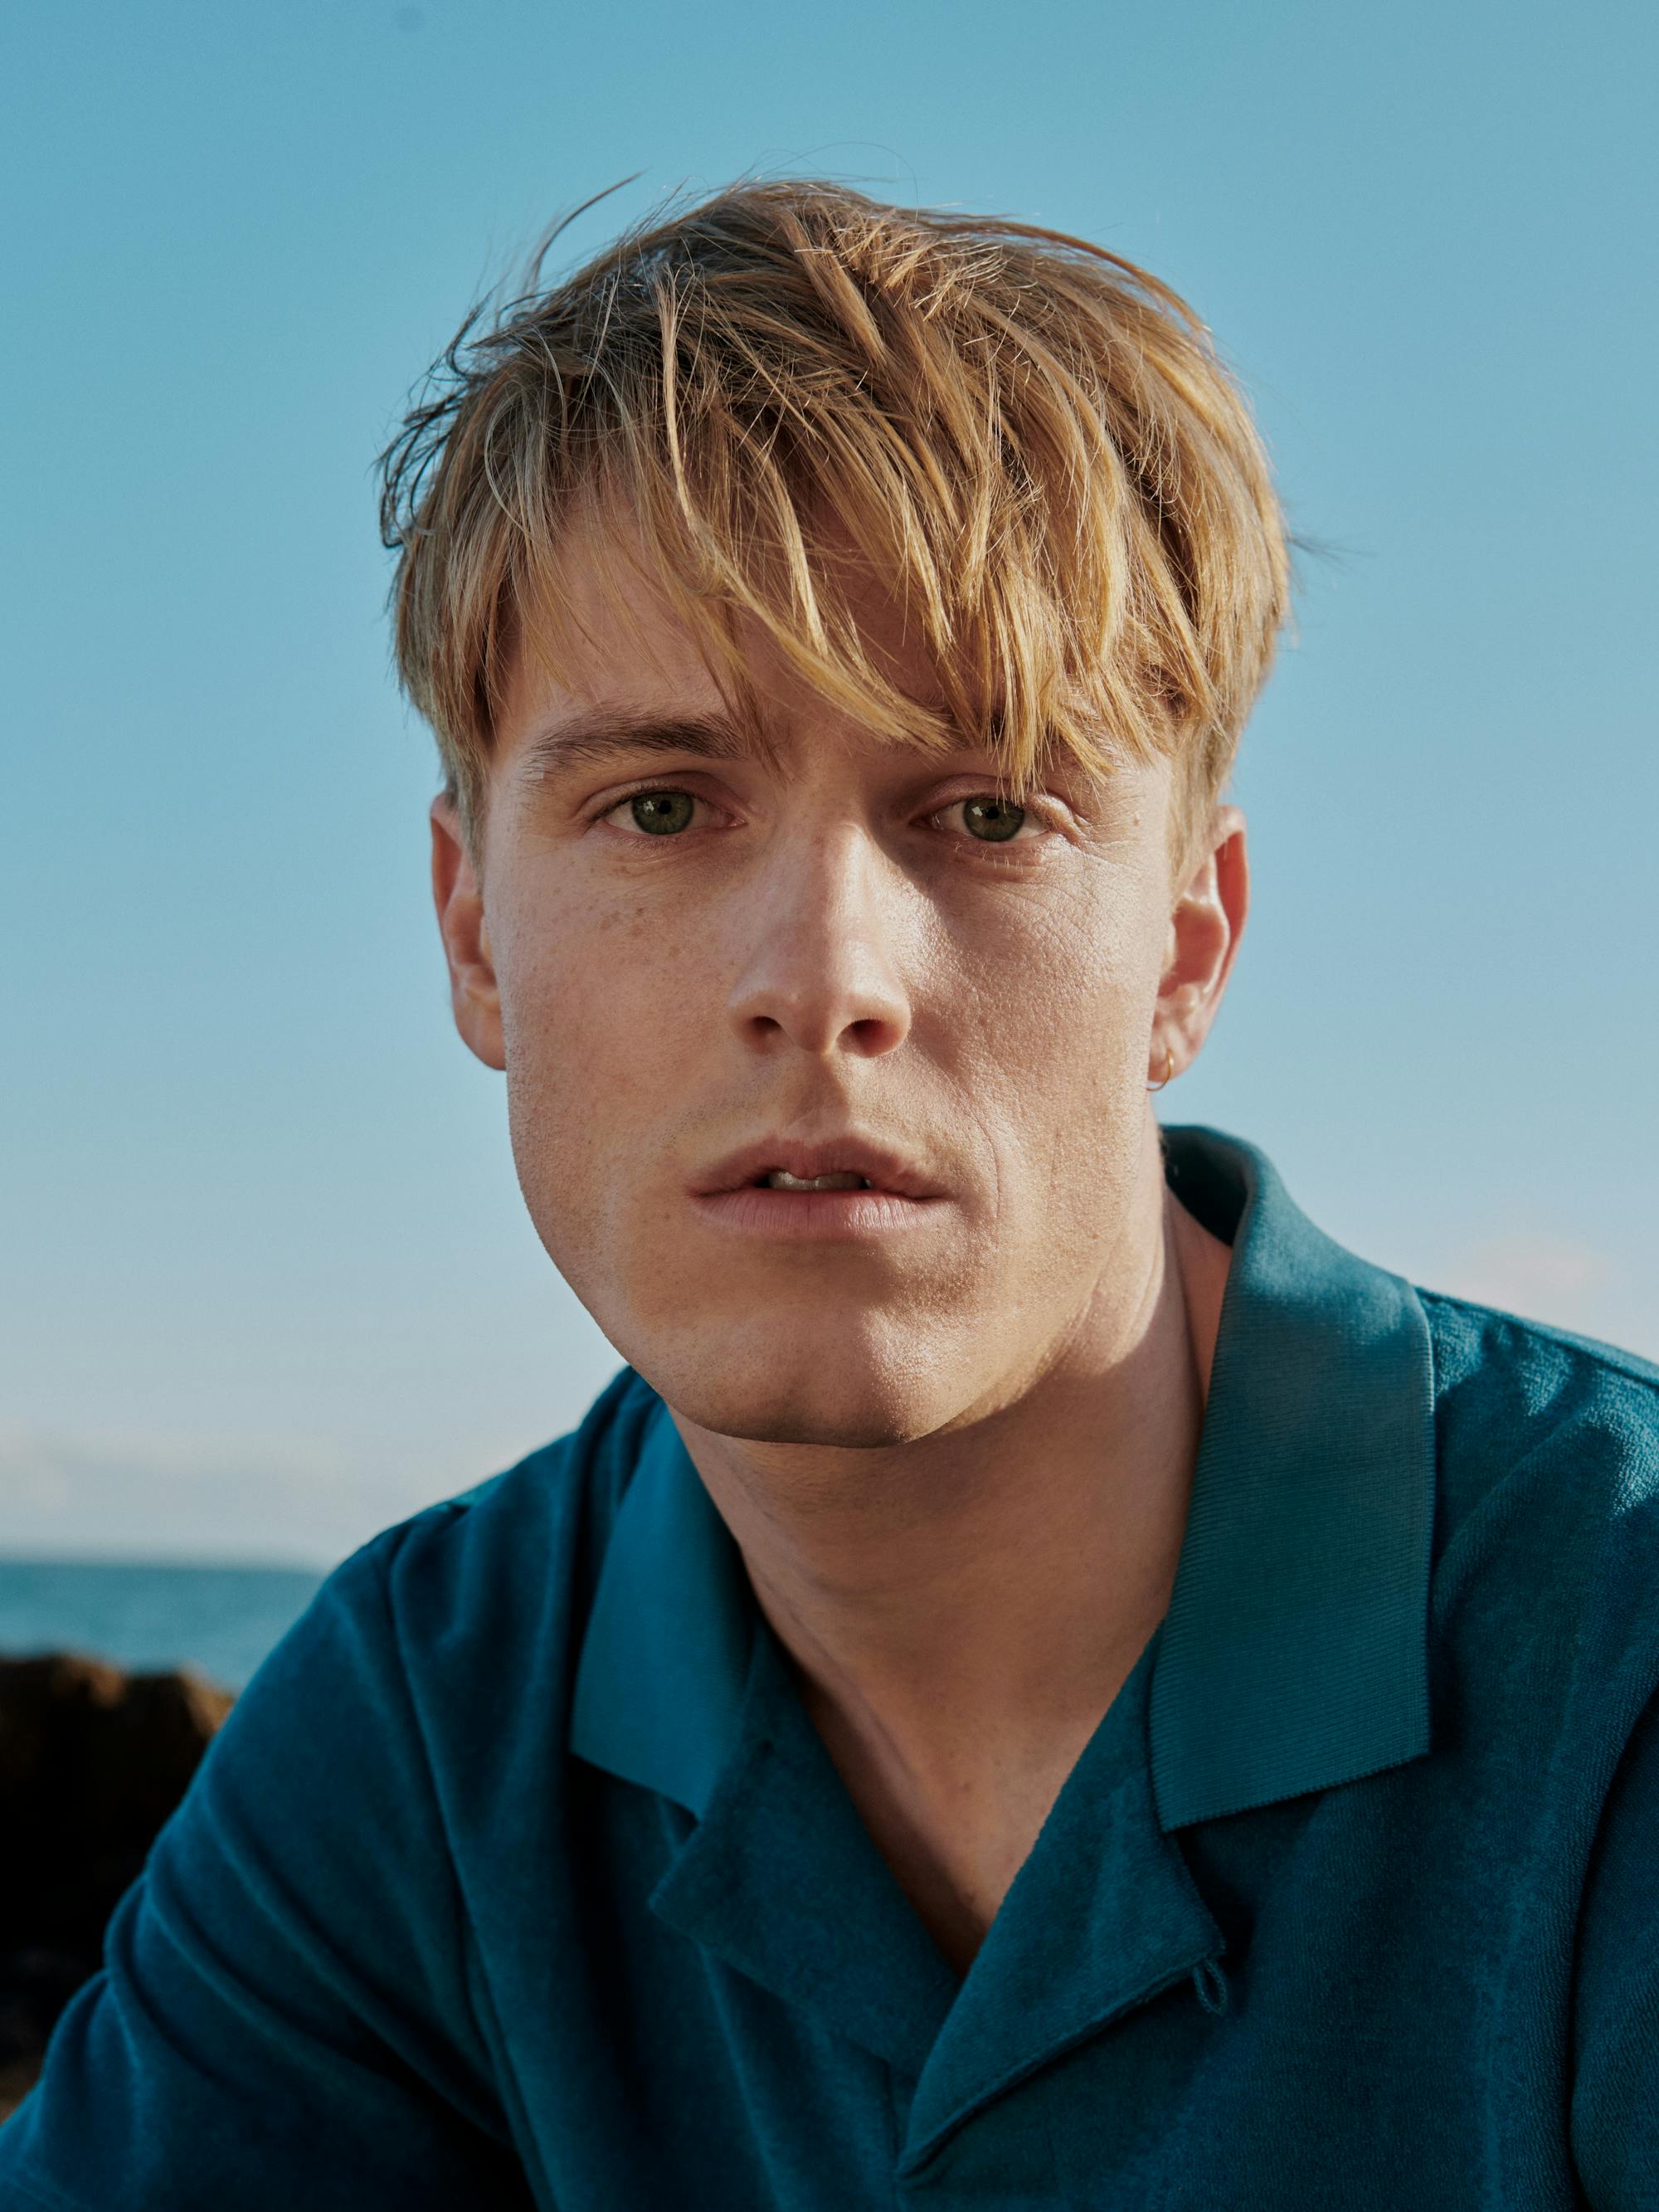 Louis Hofmann wears a teal polo and looks yearningly at the camera.